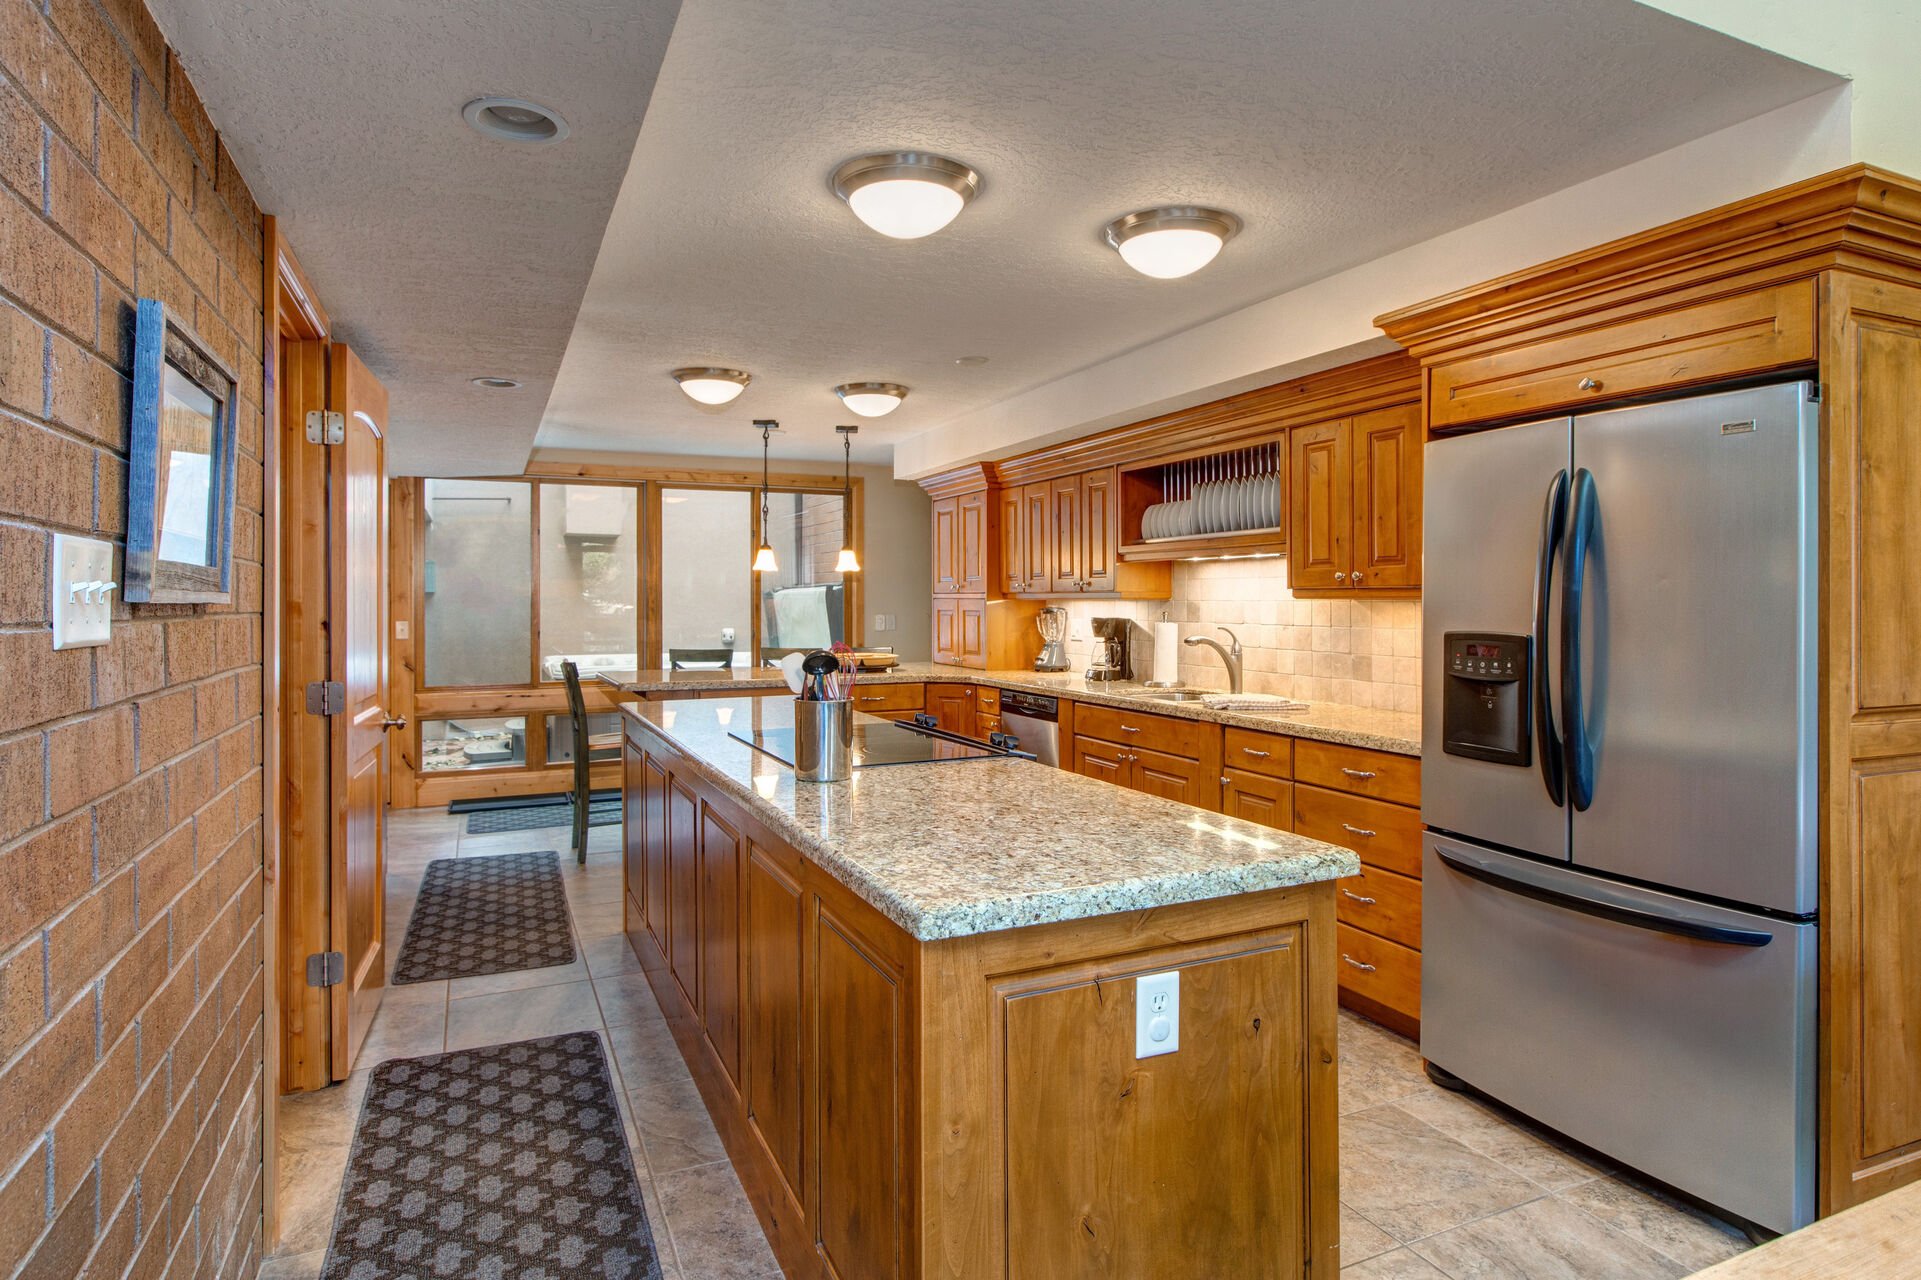 Kitchen Area with a Large Center Island with Electric Range with a Convection Oven